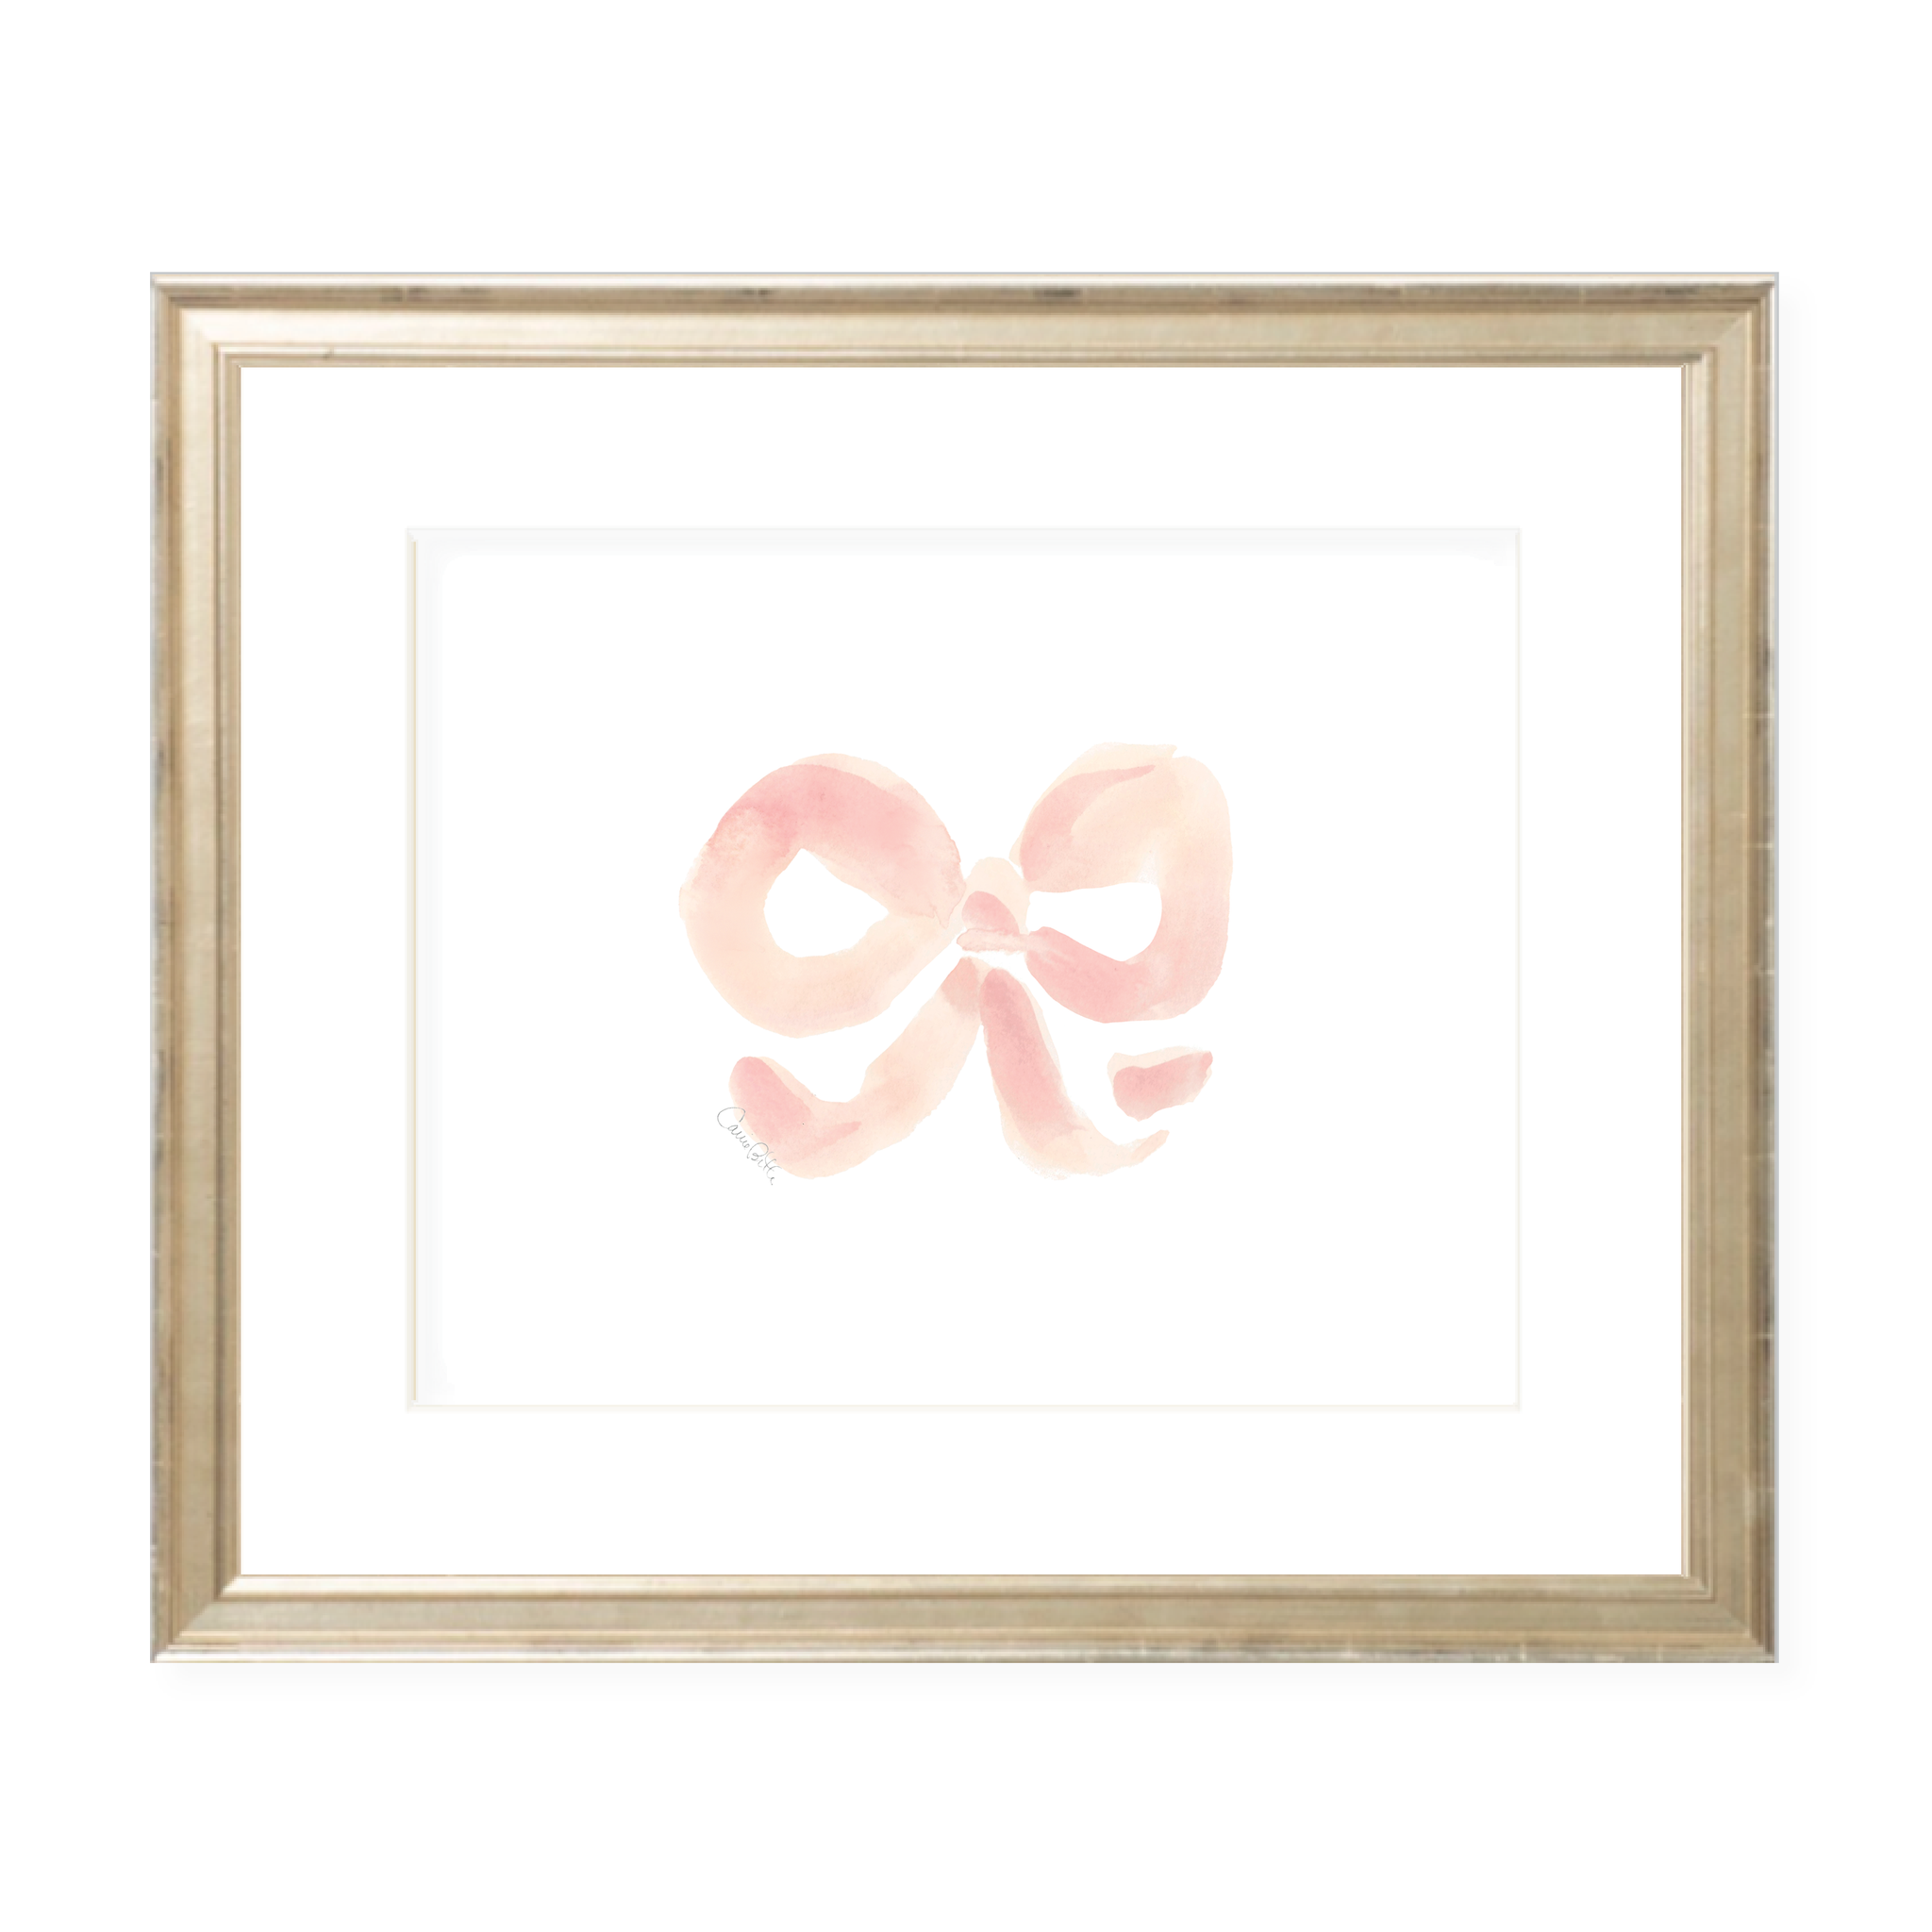 Gafferty Bow Pink Left Watercolor Print